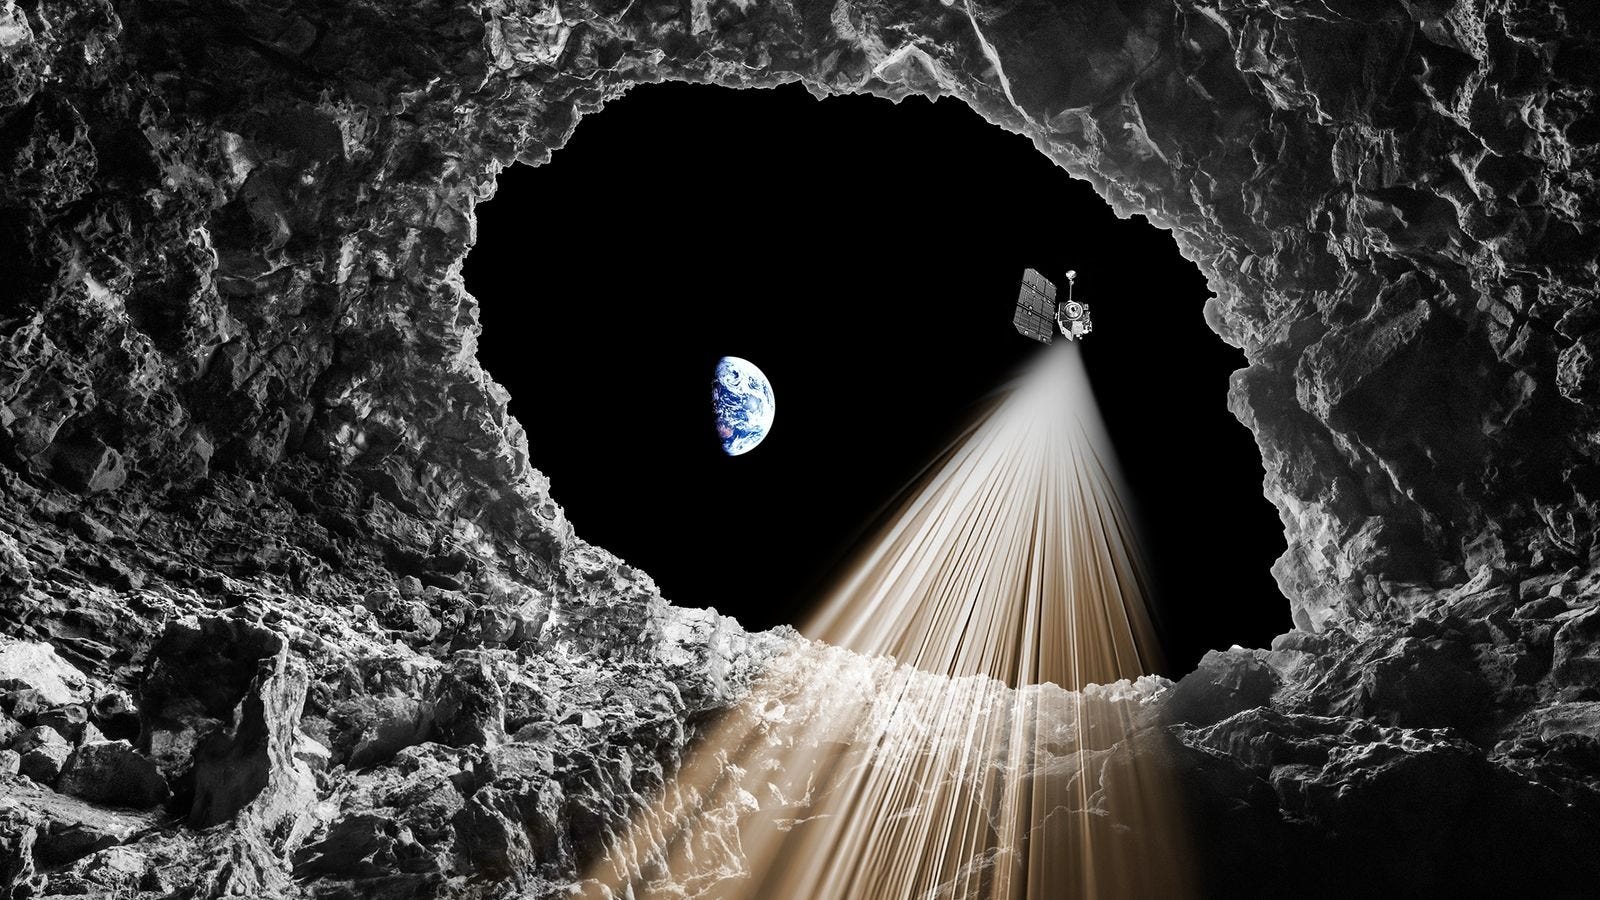 Gather Around We’re Moving: A Cave Has Been Discovered on the Moon’s S